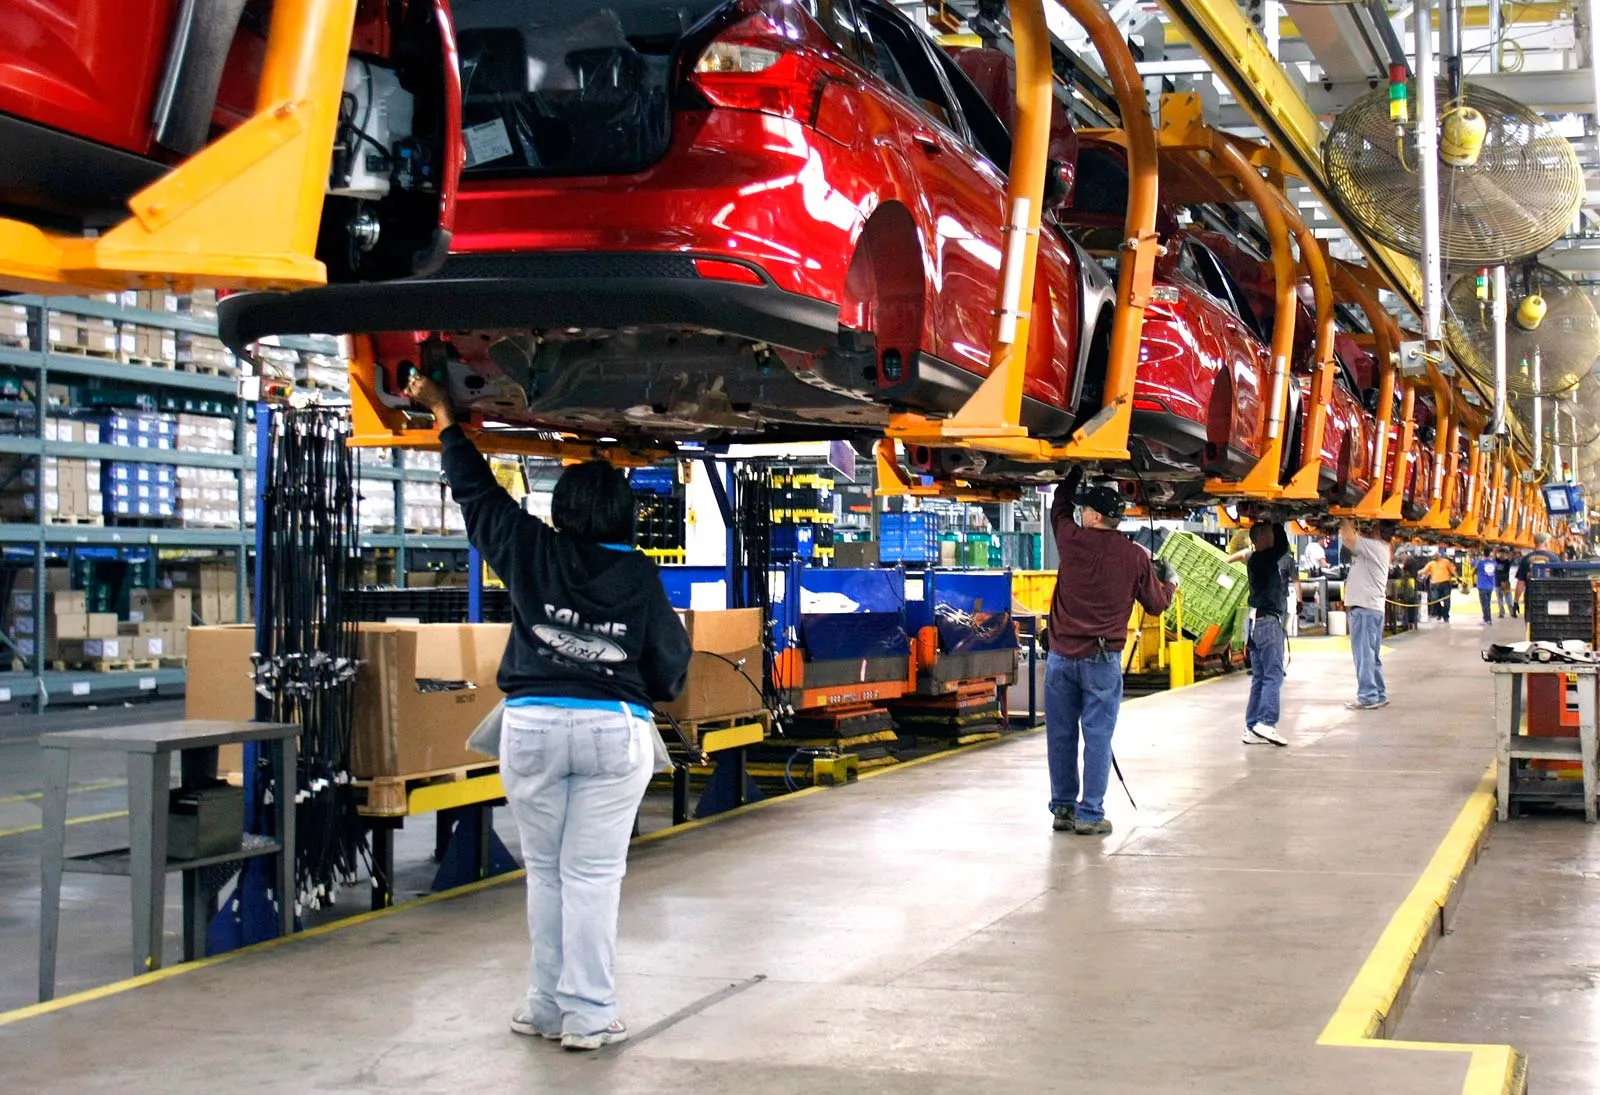 U.S. Vehicle Production Crown Goes to Ford in Latest Report